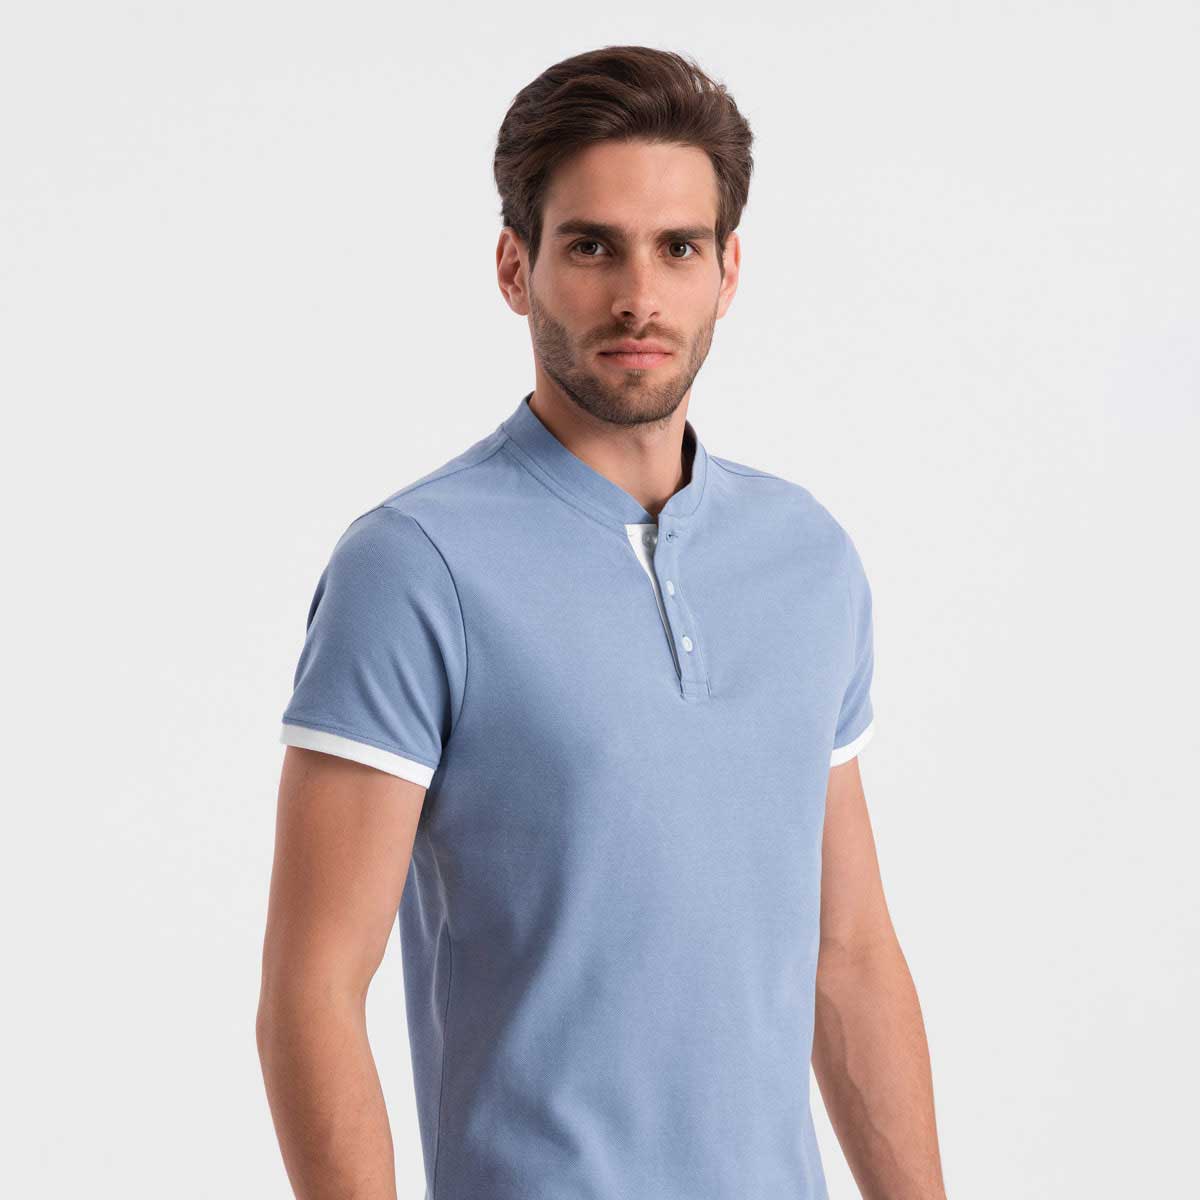 Wholesale Polo Shirts Manufacturers in Honduras